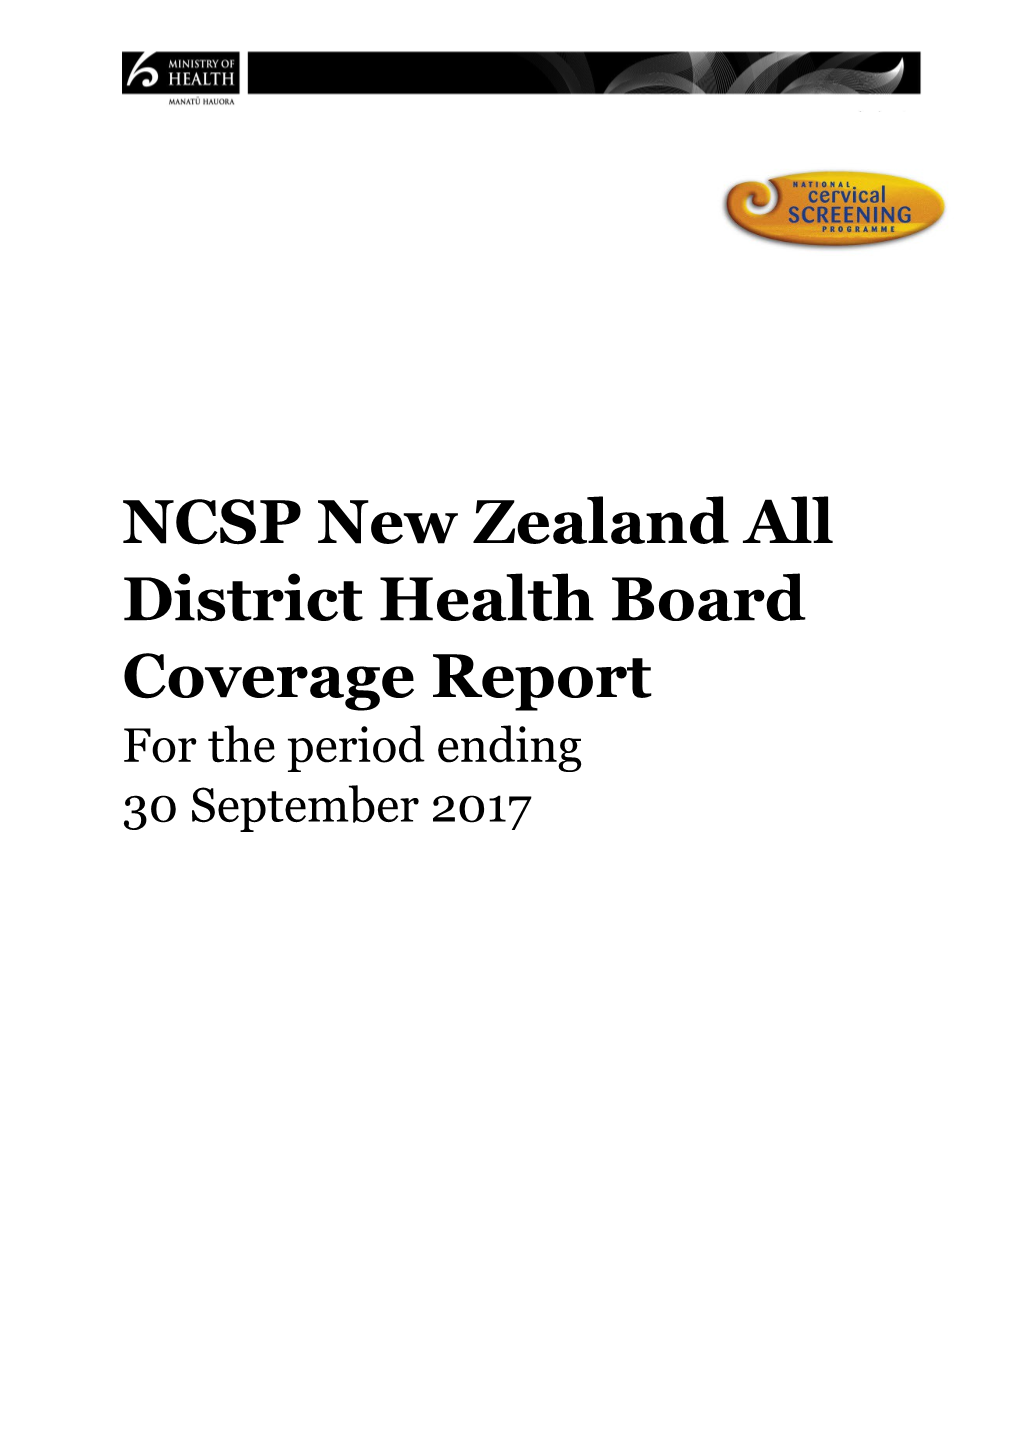 NCSP New Zealand All District Health Boardcoverage Report